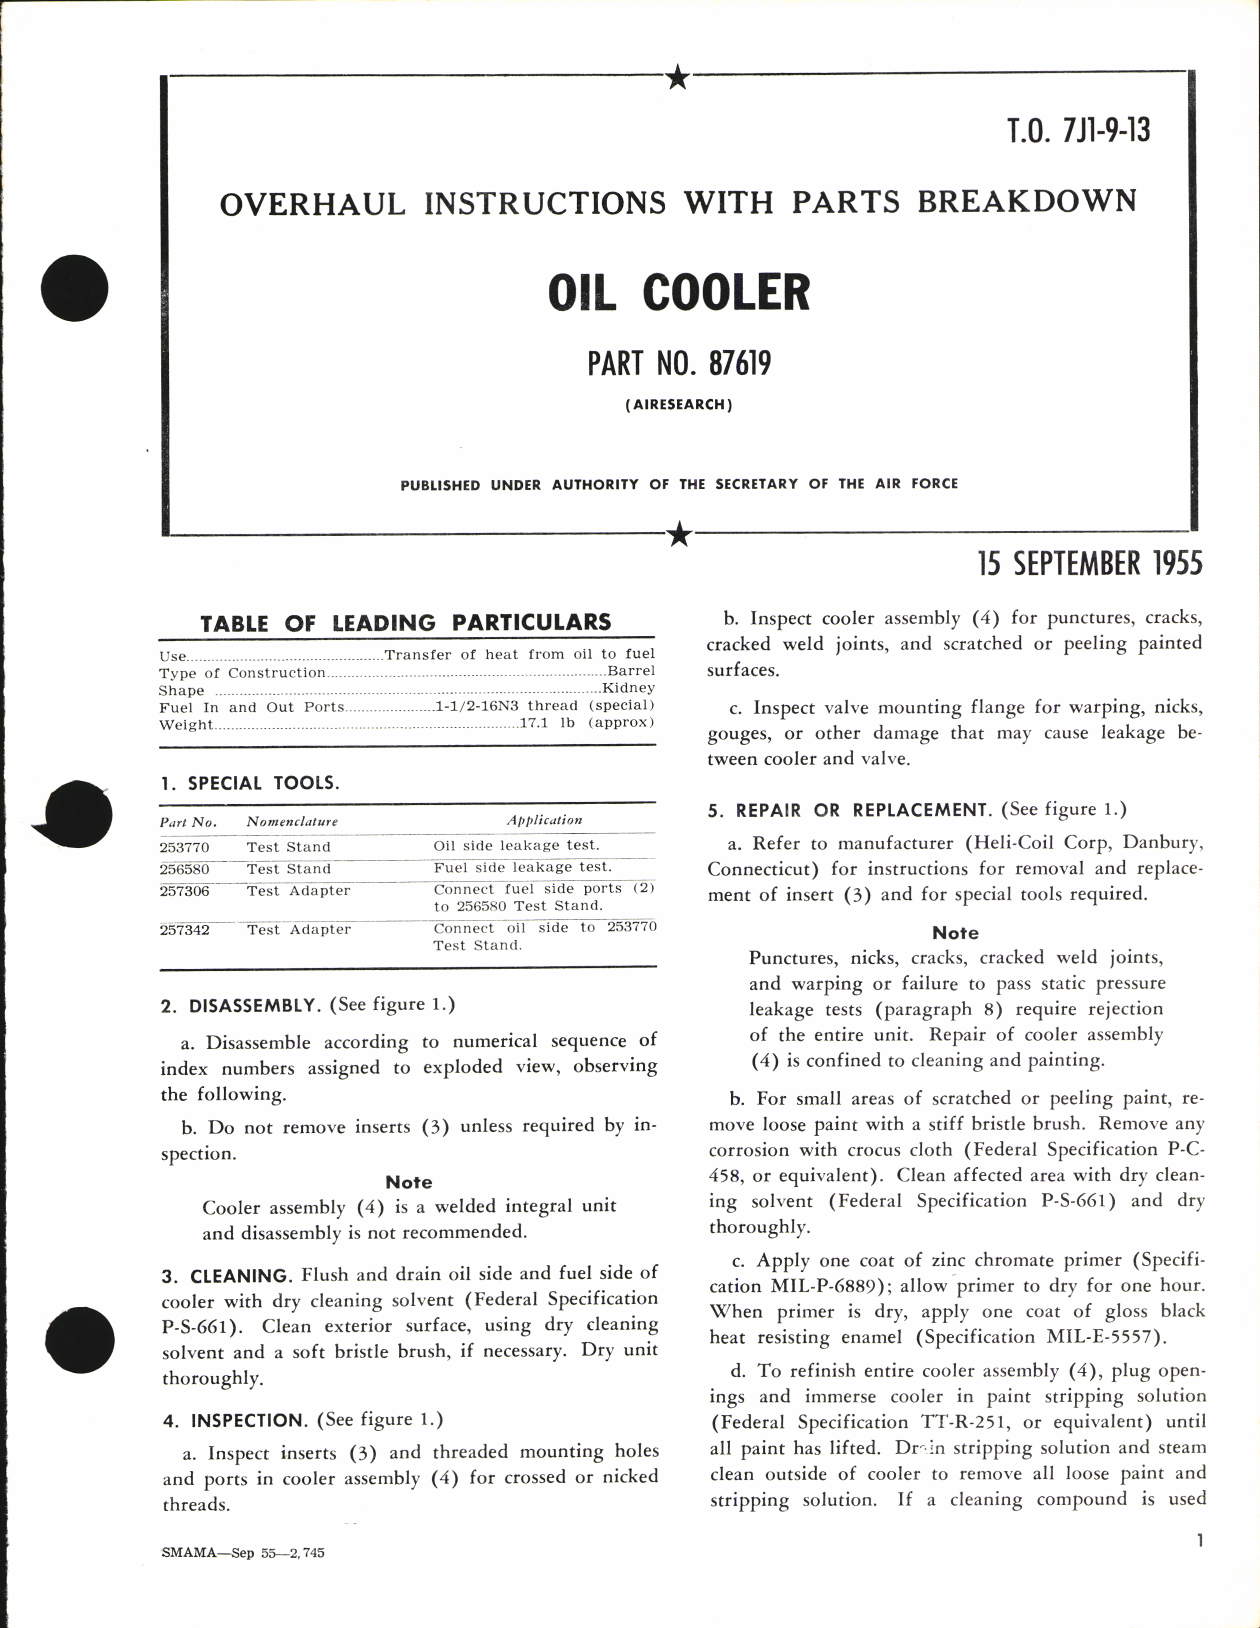 Sample page 1 from AirCorps Library document: Overhaul Instructions with Parts Breakdown for Oil Cooler Part No. 87619